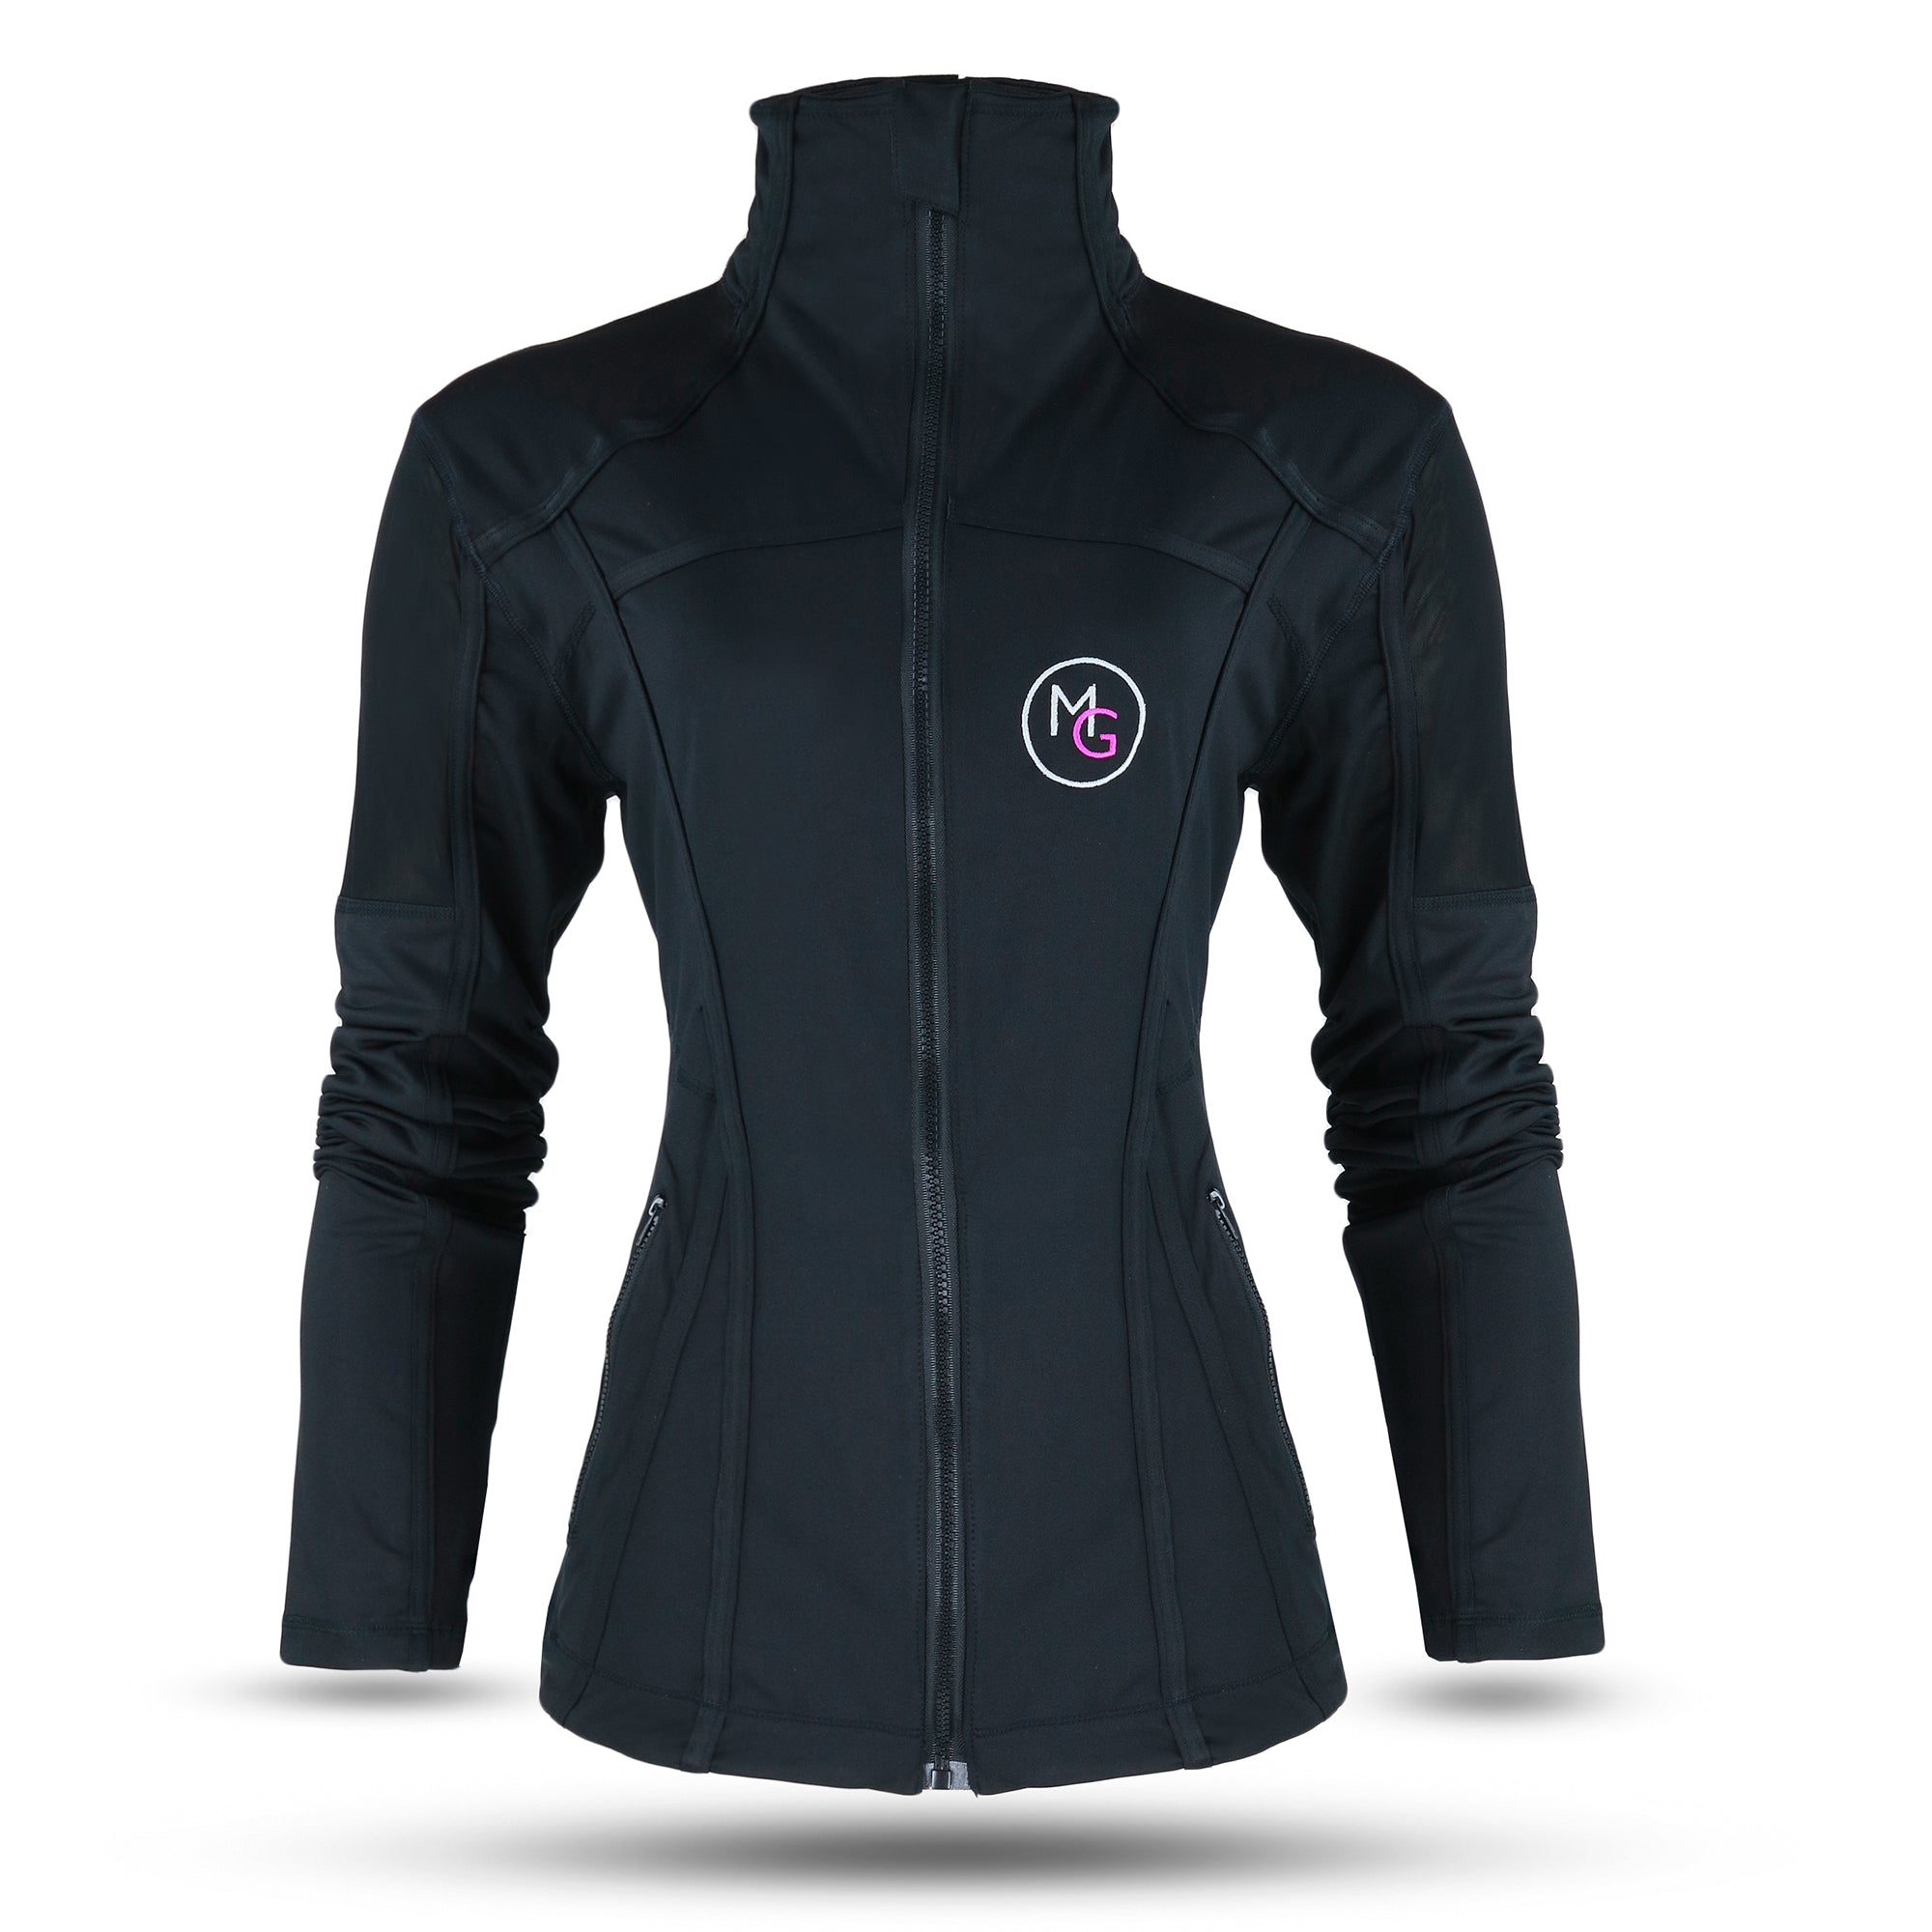 ***ELITE COLLECTION** Black Jacket Styled with Mesh Inserts